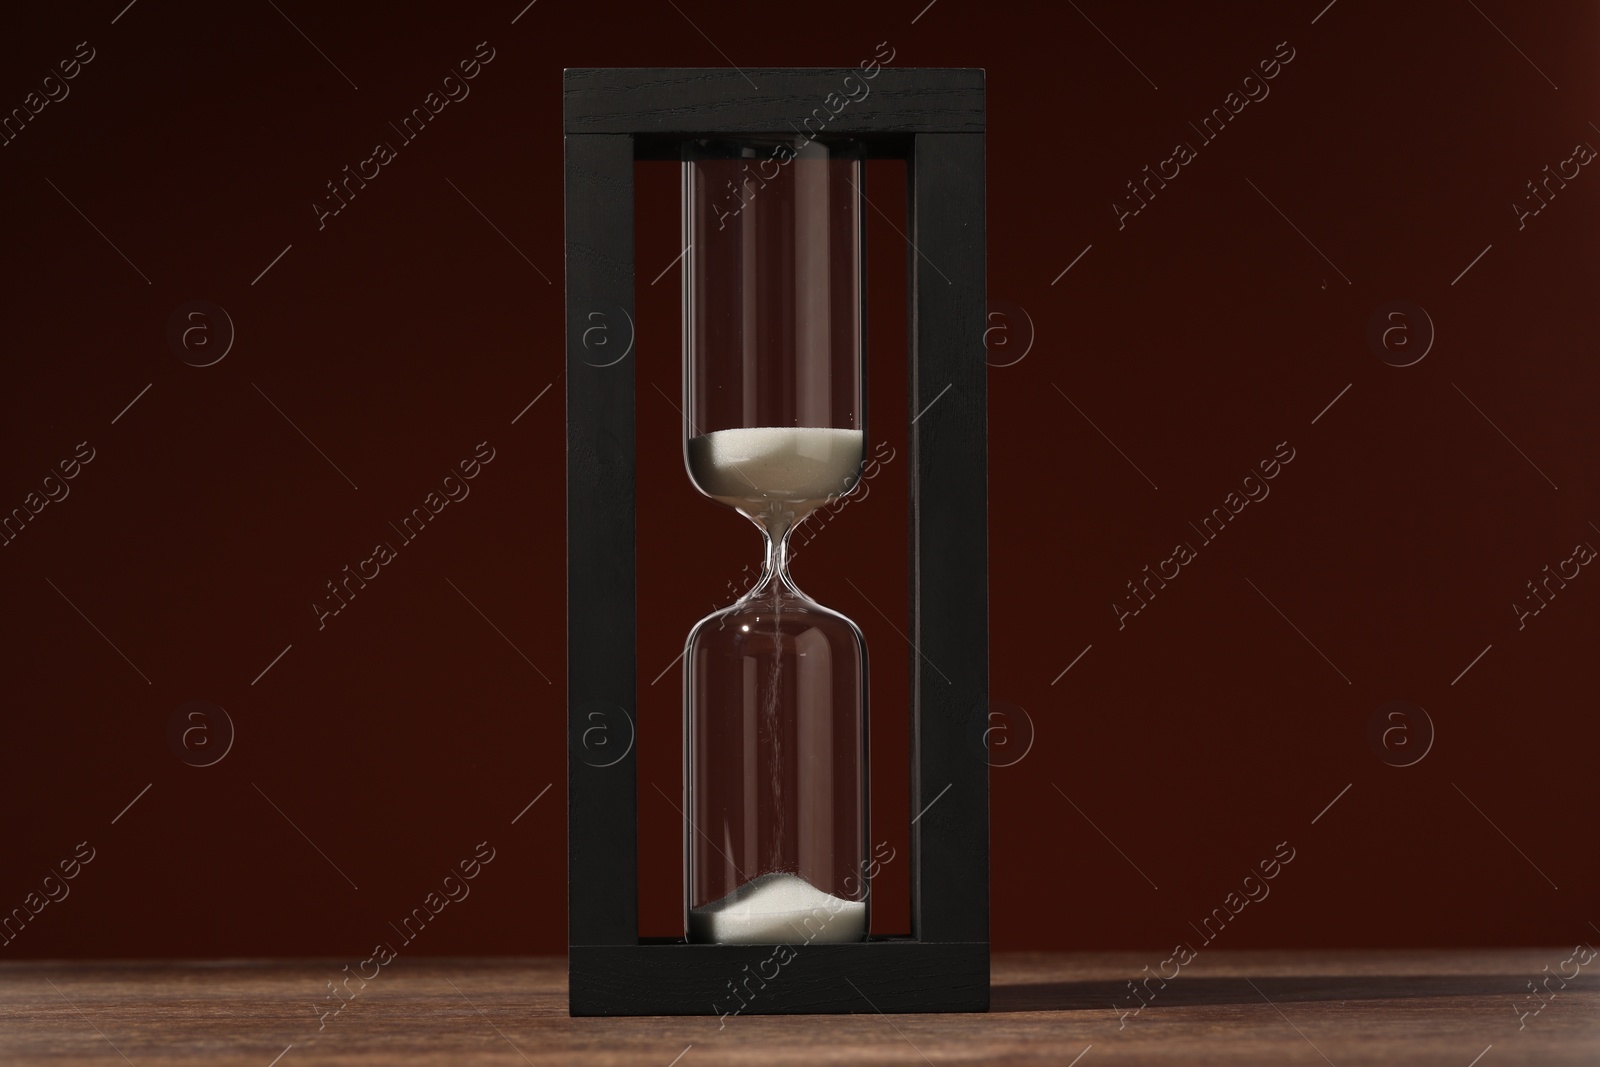 Photo of Hourglass with flowing sand on wooden table against brown background